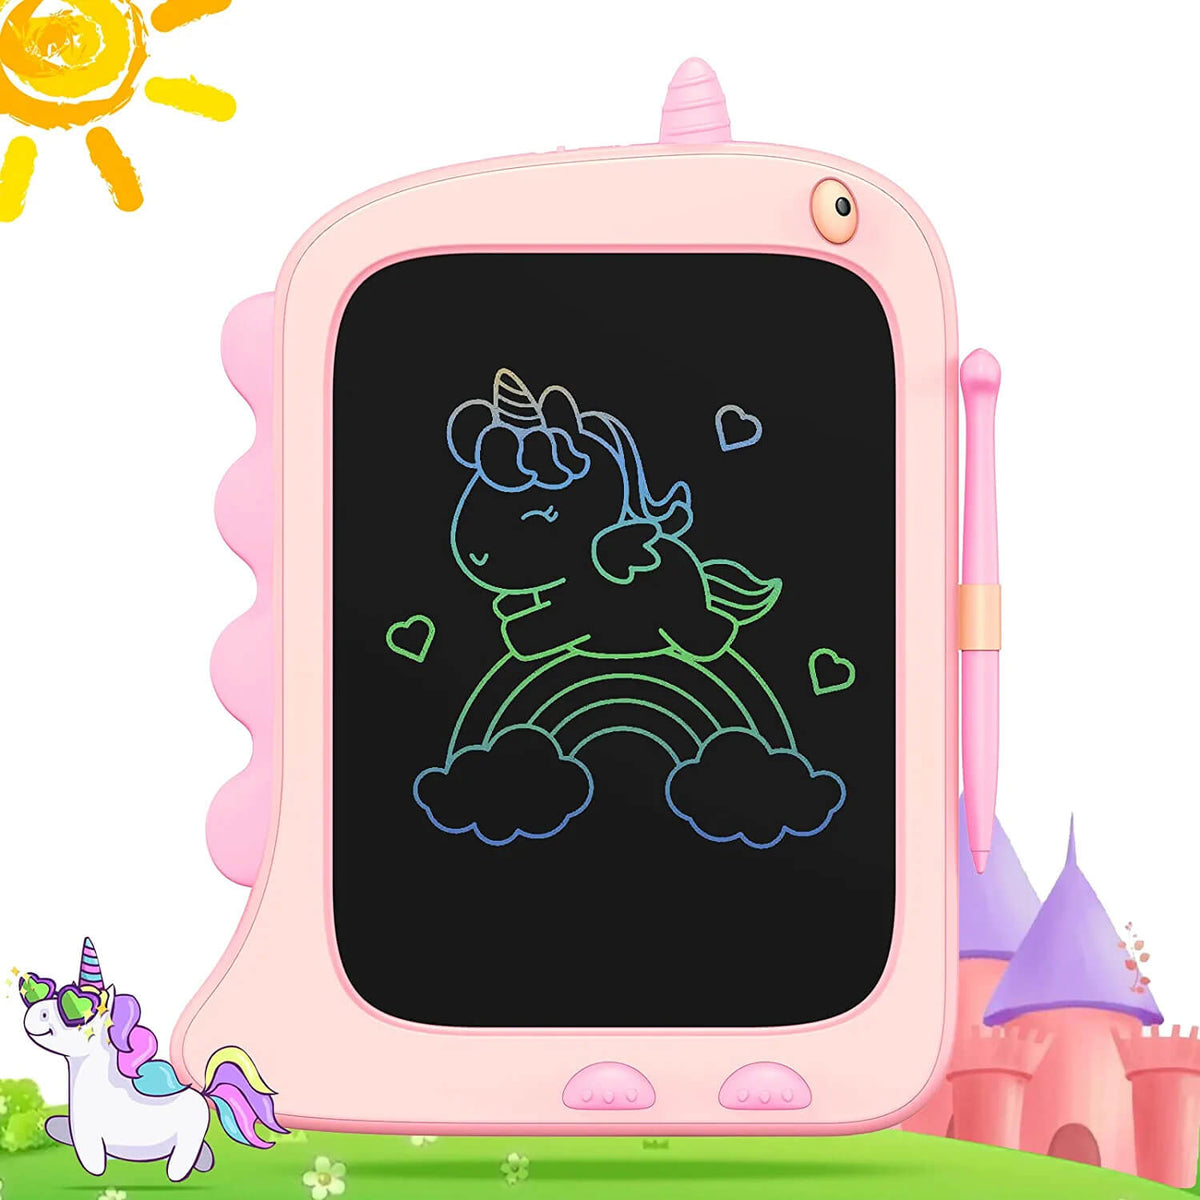 ORSEN Dinosaur LCD Writing Tablet Toddler Toys, 8.5 Inch Doodle Board Drawing Pad Gifts for Kids